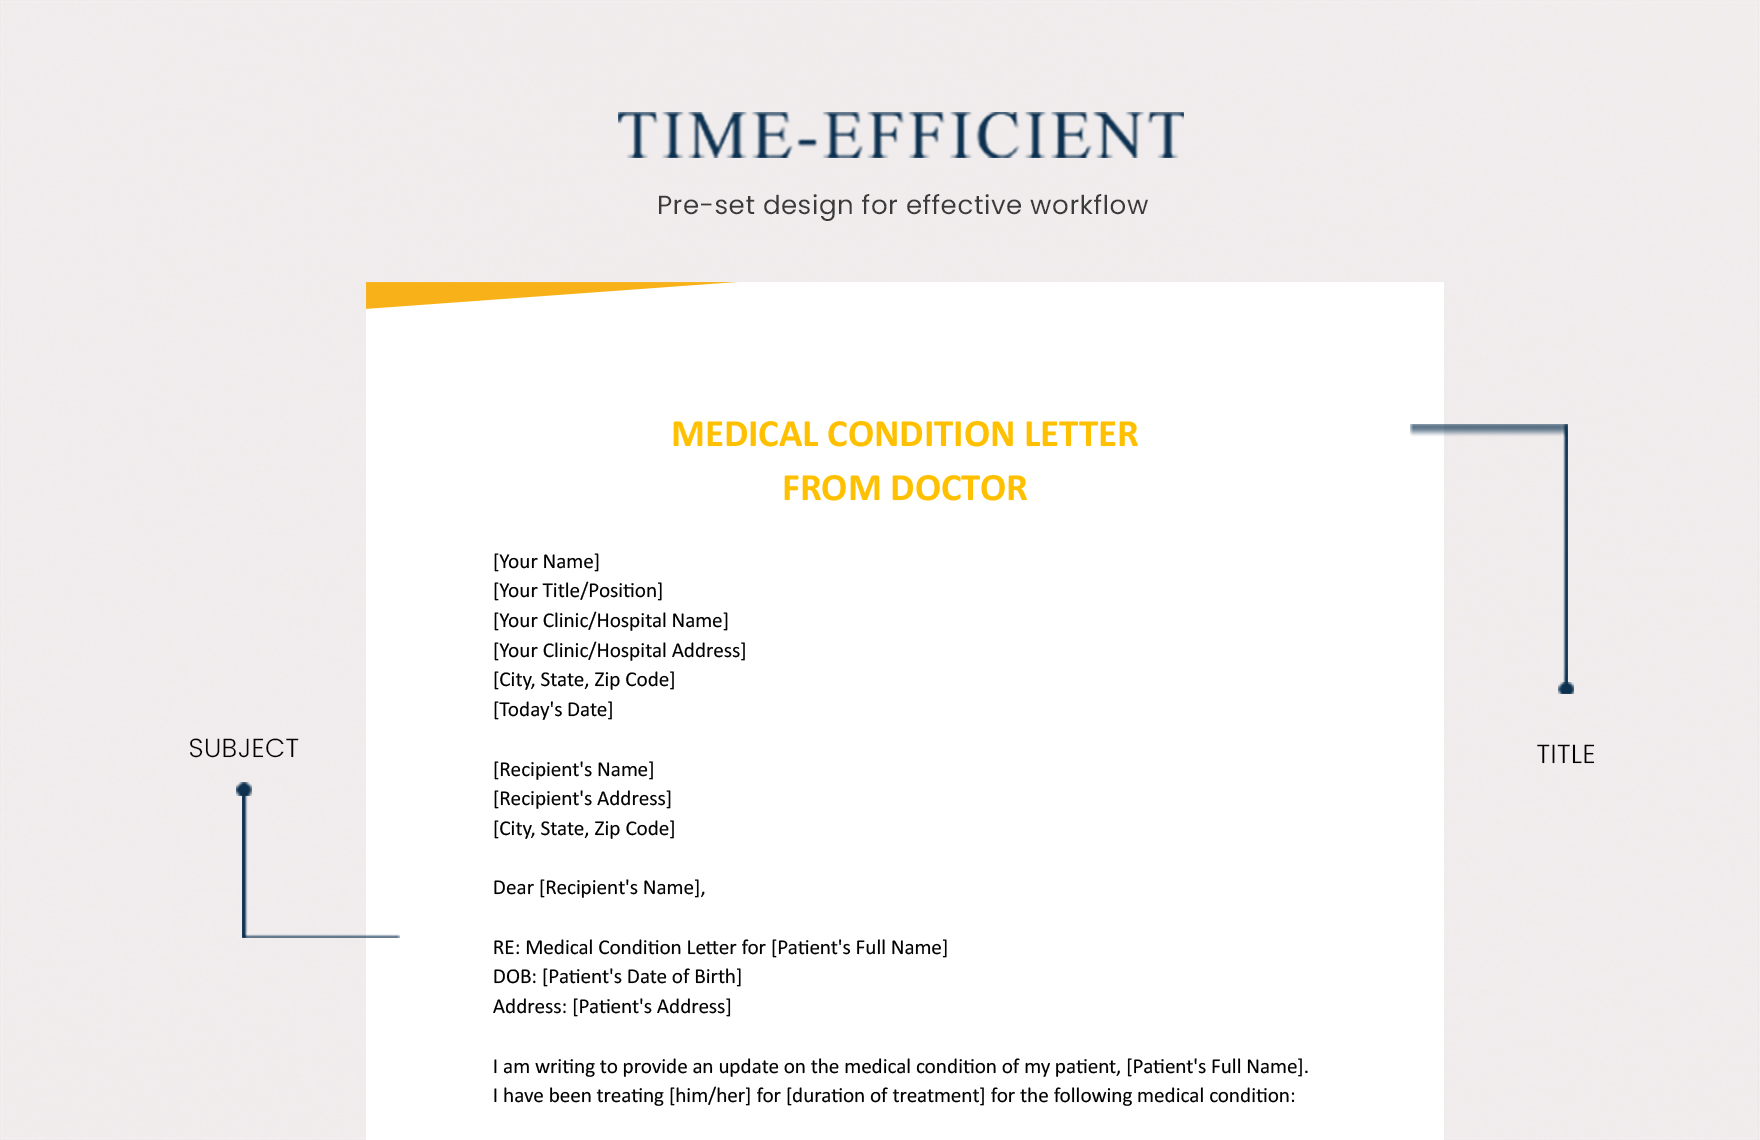 Medical Condition Letter From Doctor